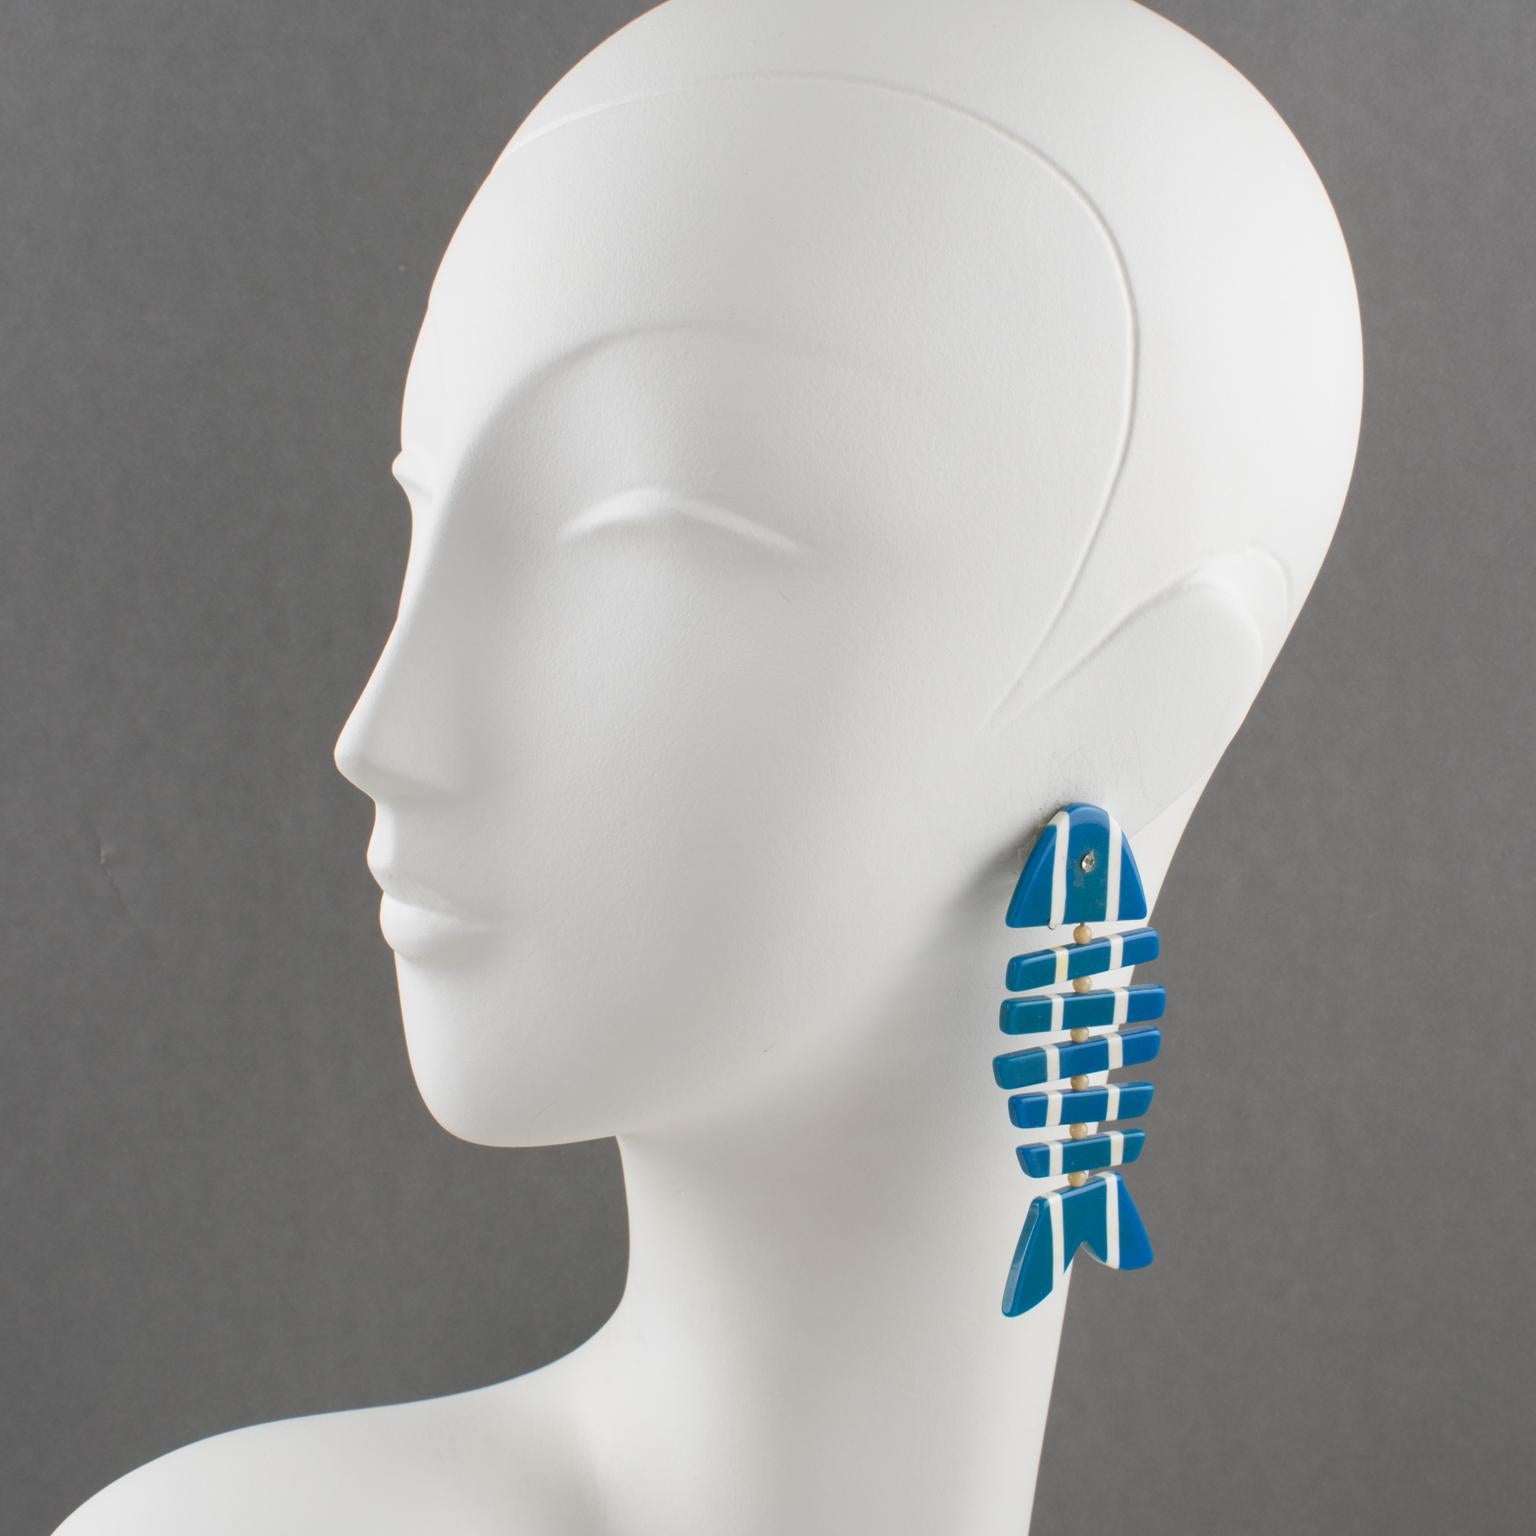 These stunning Lucite clip-on earrings feature a dangling geometric fishbone shape in a blue and white striped pattern ornate with crystal rhinestone eye and white glass bead spacers. There is no visible maker's mark.
Measurements: 3.19 in long (8